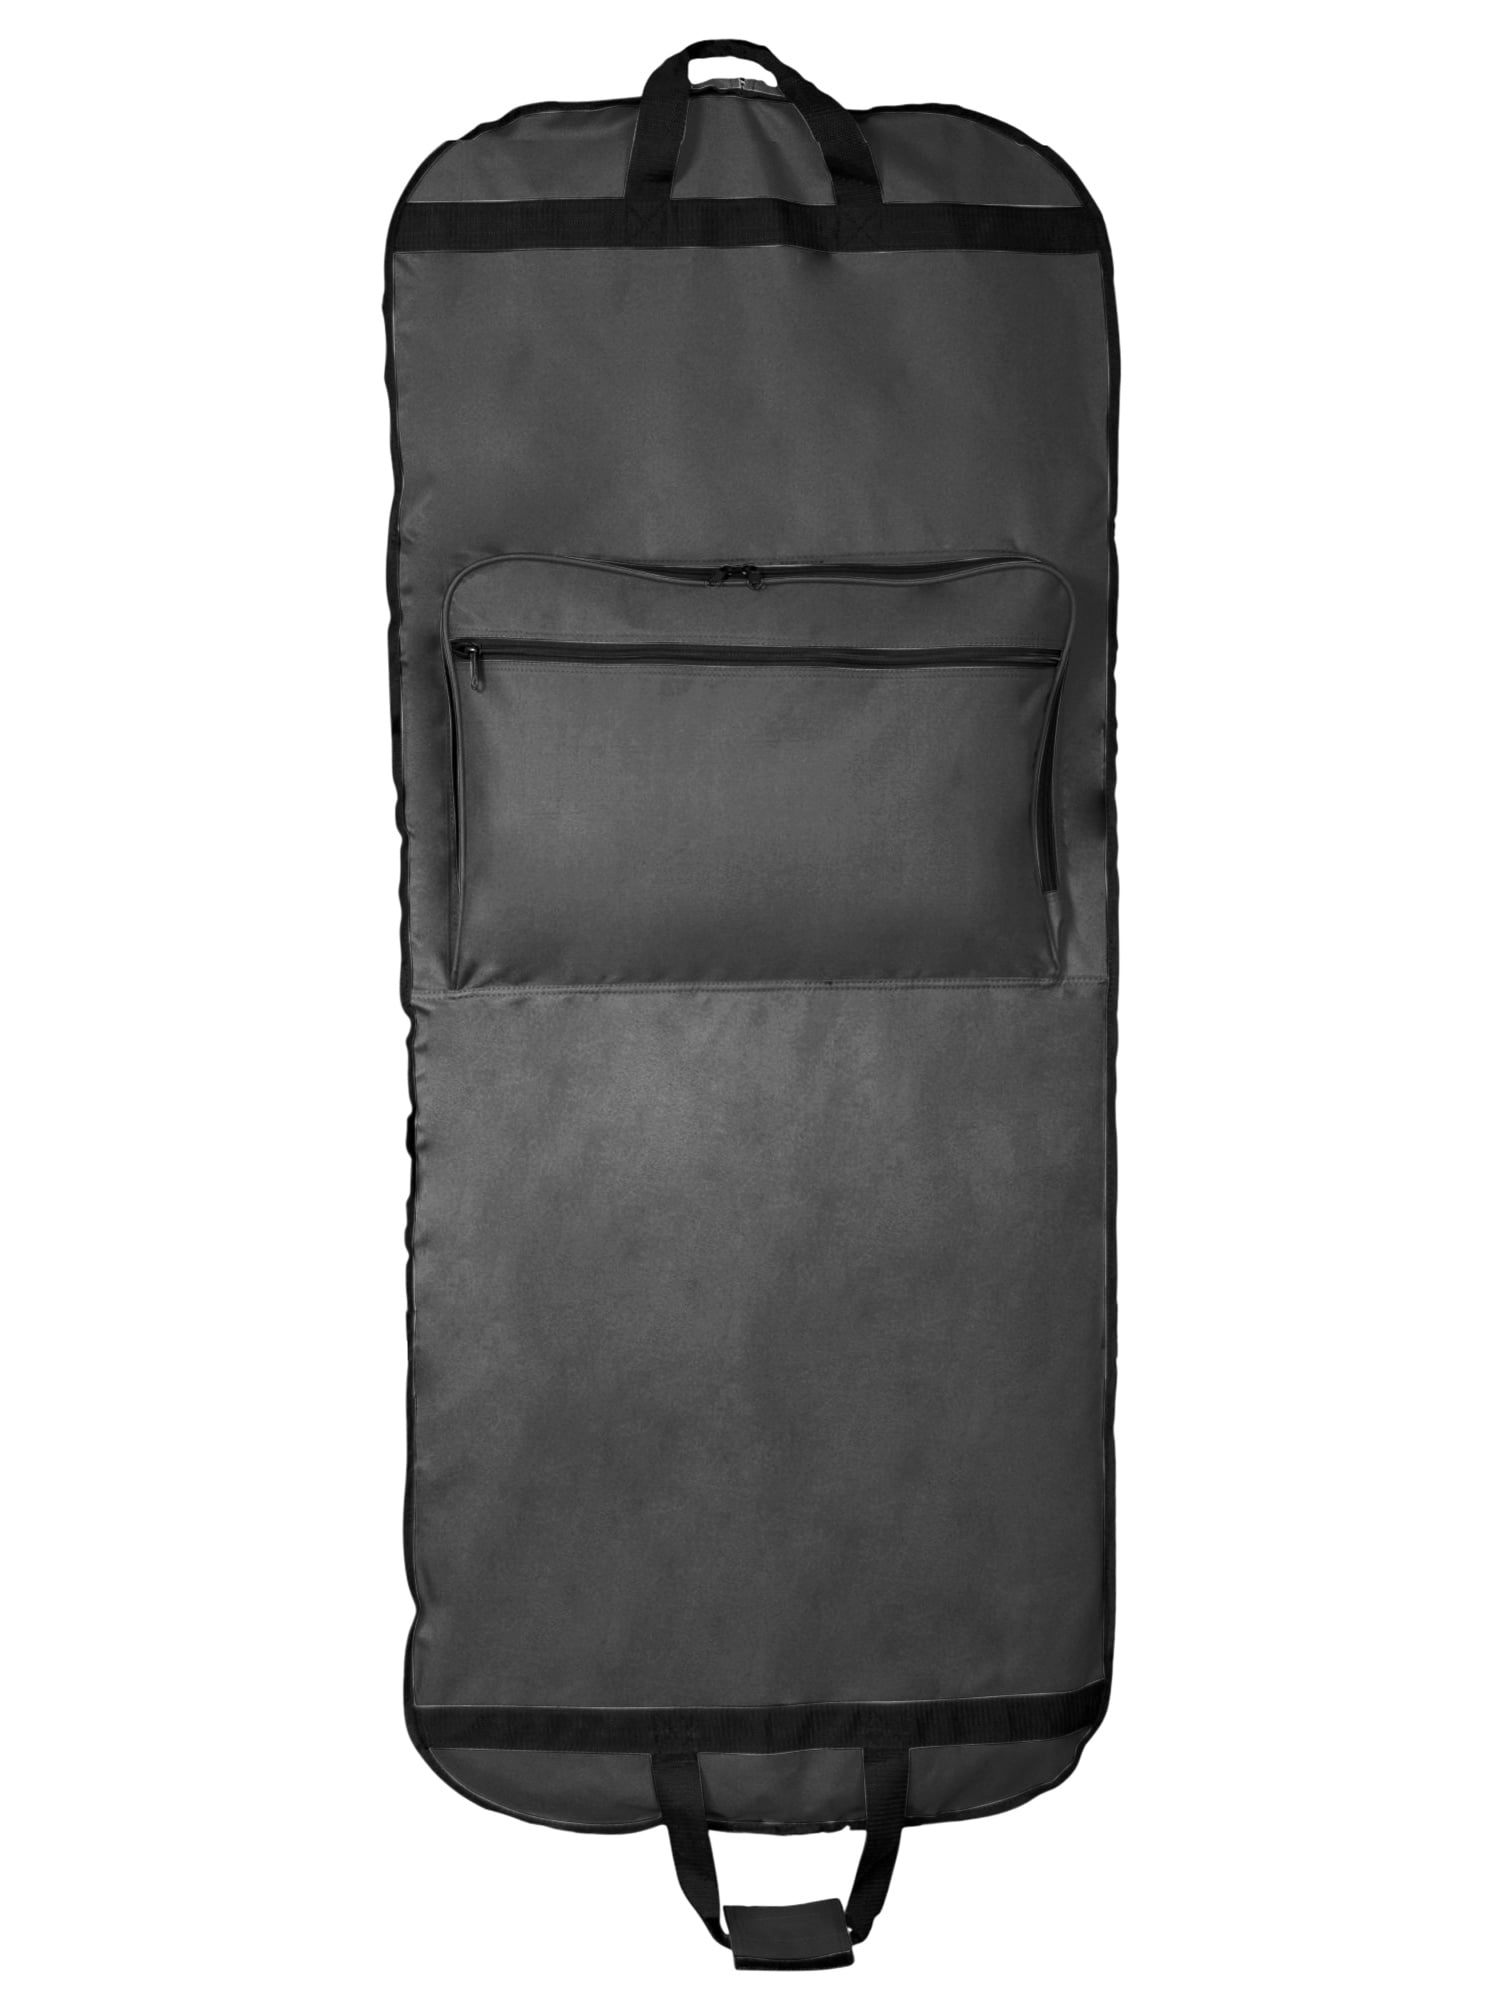 Dress and Gown Garment Travel Bags with Large Window Black Suit 54 x 24